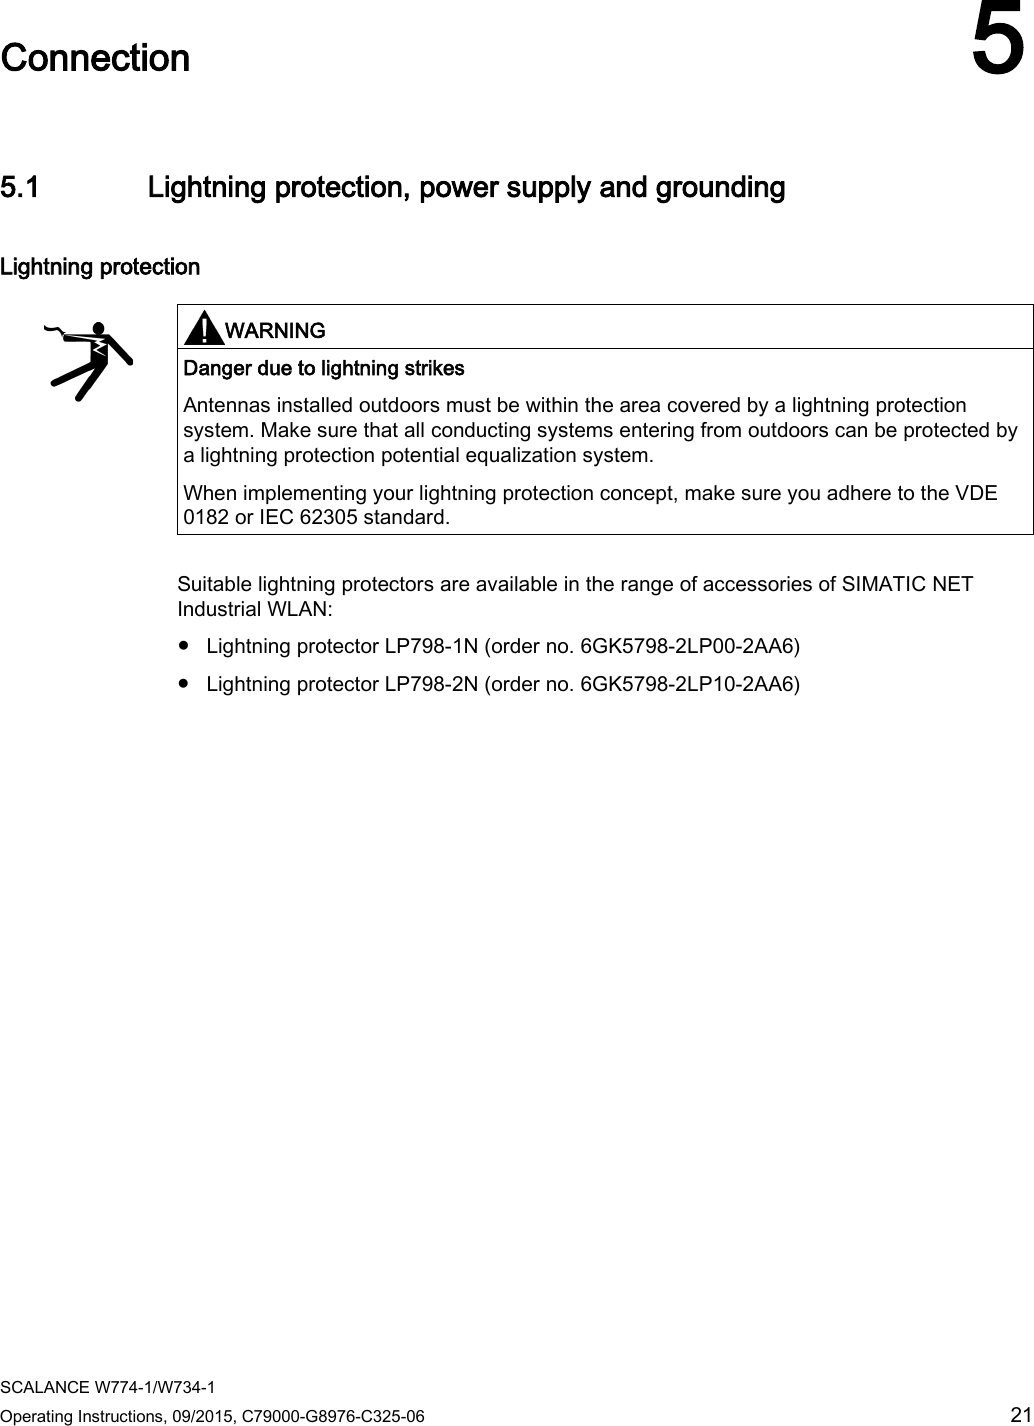  SCALANCE W774-1/W734-1 Operating Instructions, 09/2015, C79000-G8976-C325-06 21  Connection 5 5.1 Lightning protection, power supply and grounding Lightning protection   WARNING Danger due to lightning strikes Antennas installed outdoors must be within the area covered by a lightning protection system. Make sure that all conducting systems entering from outdoors can be protected by a lightning protection potential equalization system. When implementing your lightning protection concept, make sure you adhere to the VDE 0182 or IEC 62305 standard.  Suitable lightning protectors are available in the range of accessories of SIMATIC NET Industrial WLAN: ● Lightning protector LP798-1N (order no. 6GK5798-2LP00-2AA6) ● Lightning protector LP798-2N (order no. 6GK5798-2LP10-2AA6) 